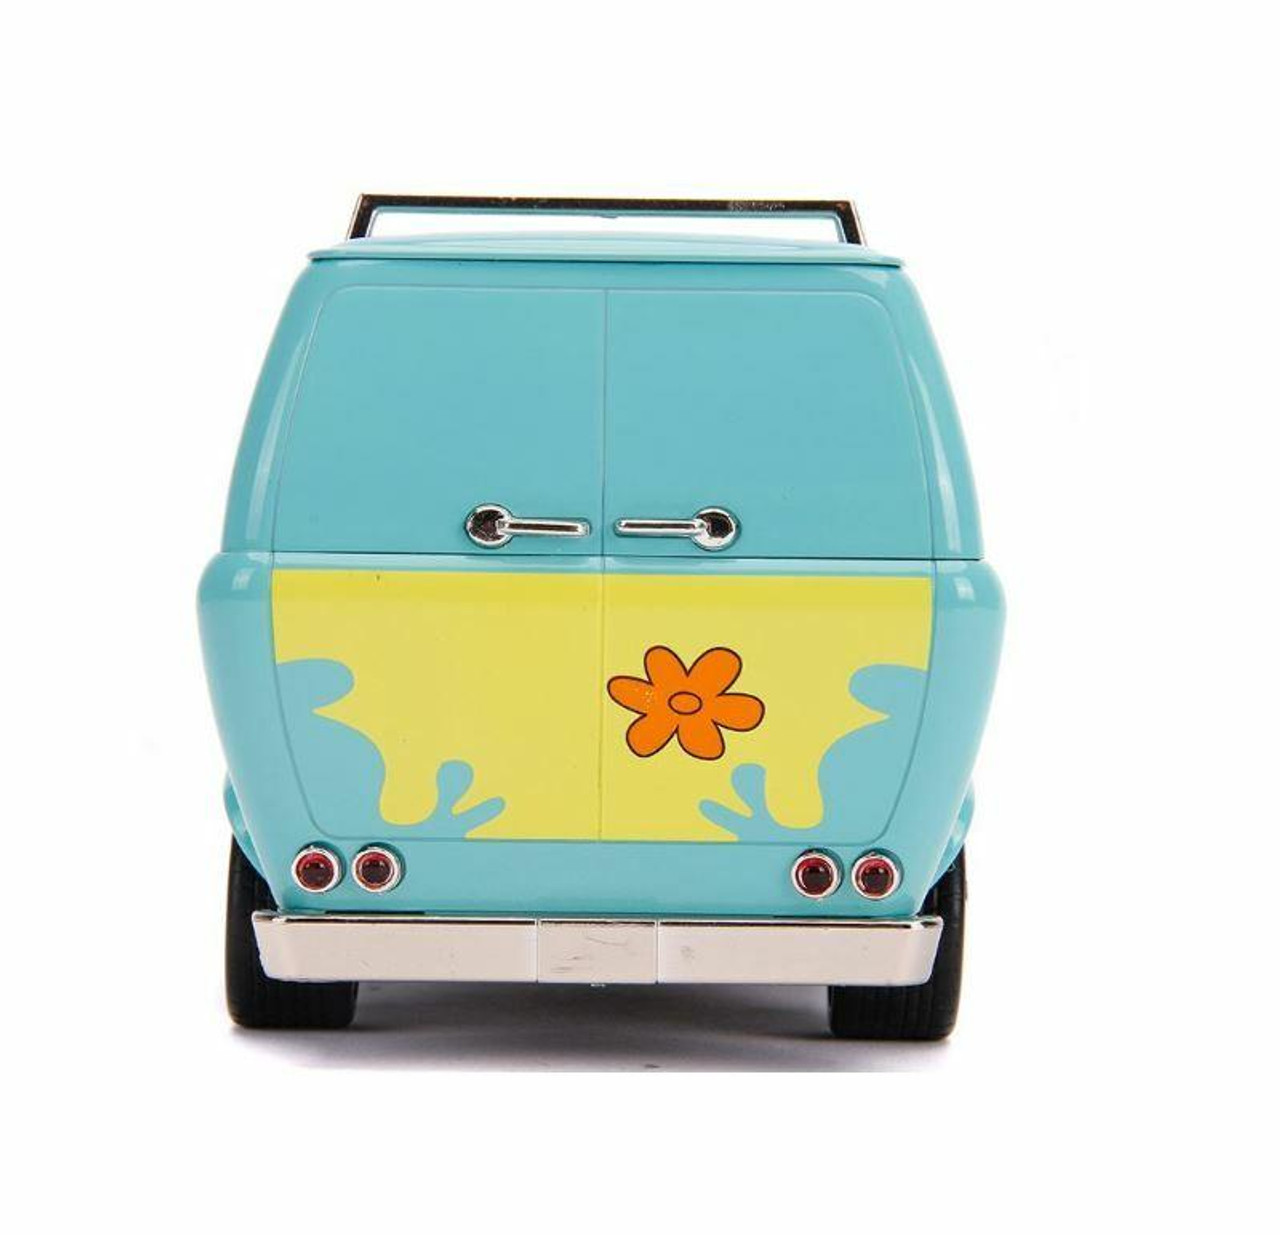 https://cdn11.bigcommerce.com/s-cy4lua1xoh/images/stencil/1280x1280/products/12563/73741/scooby-doo-mystery-machine-with-scooby-and-shaggy-figures-124-die-cast-vehicle-preorder-expected-ship-date-june-2022__48363.1654613911.jpg?c=1?imbypass=on